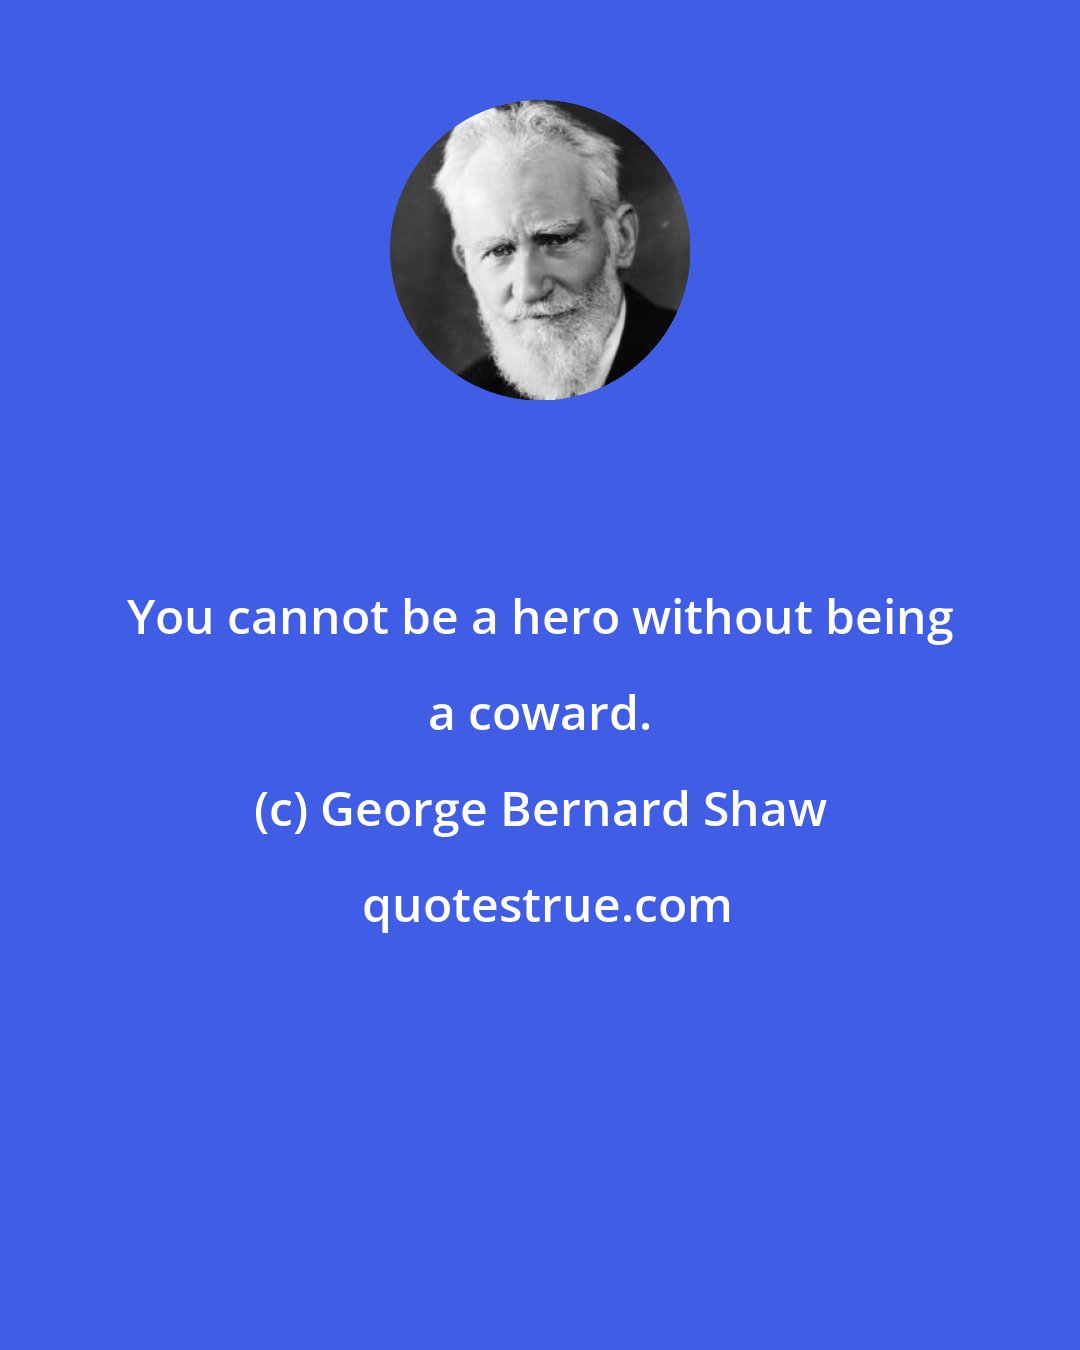 George Bernard Shaw: You cannot be a hero without being a coward.